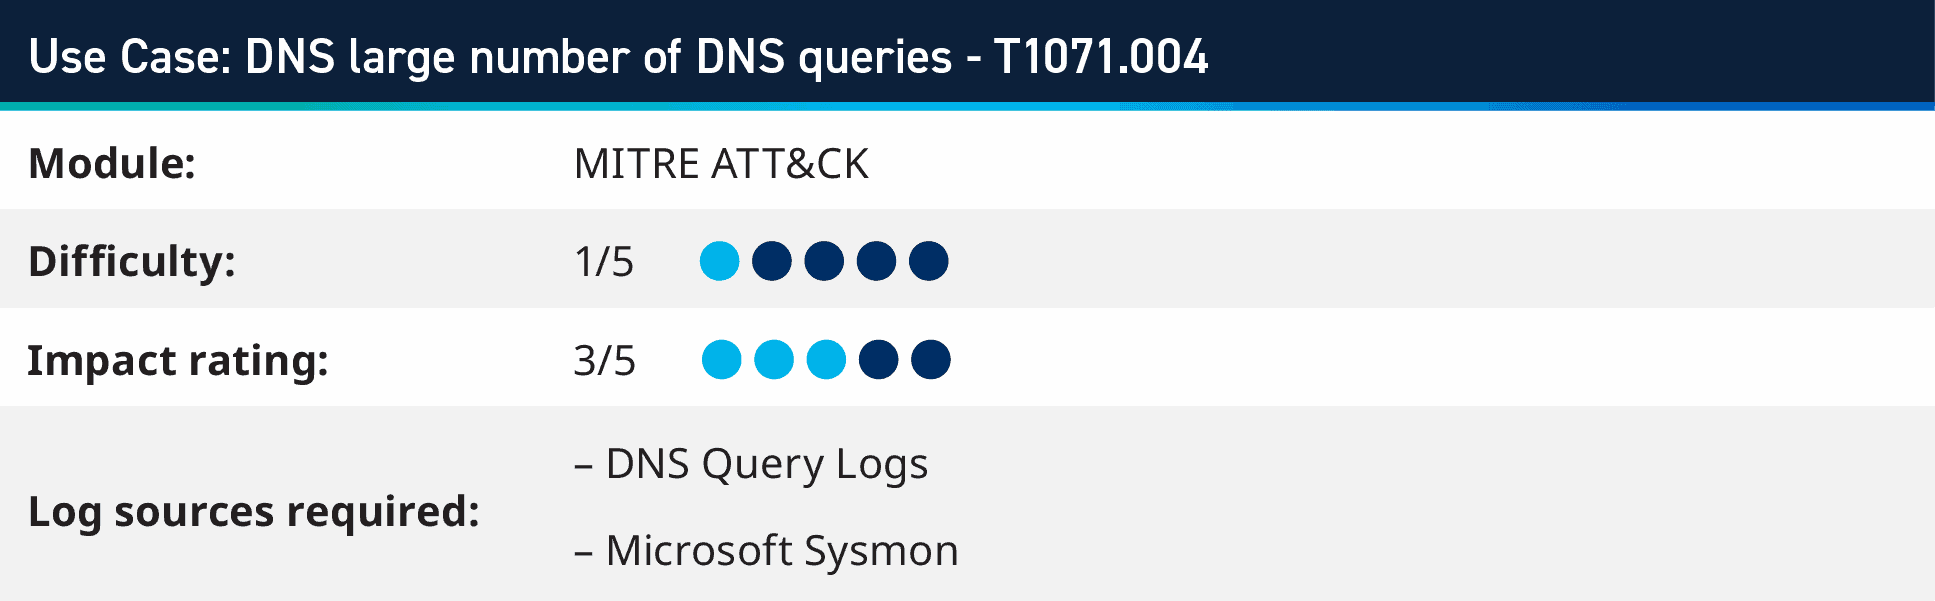 DNS large number of DNS queries use case